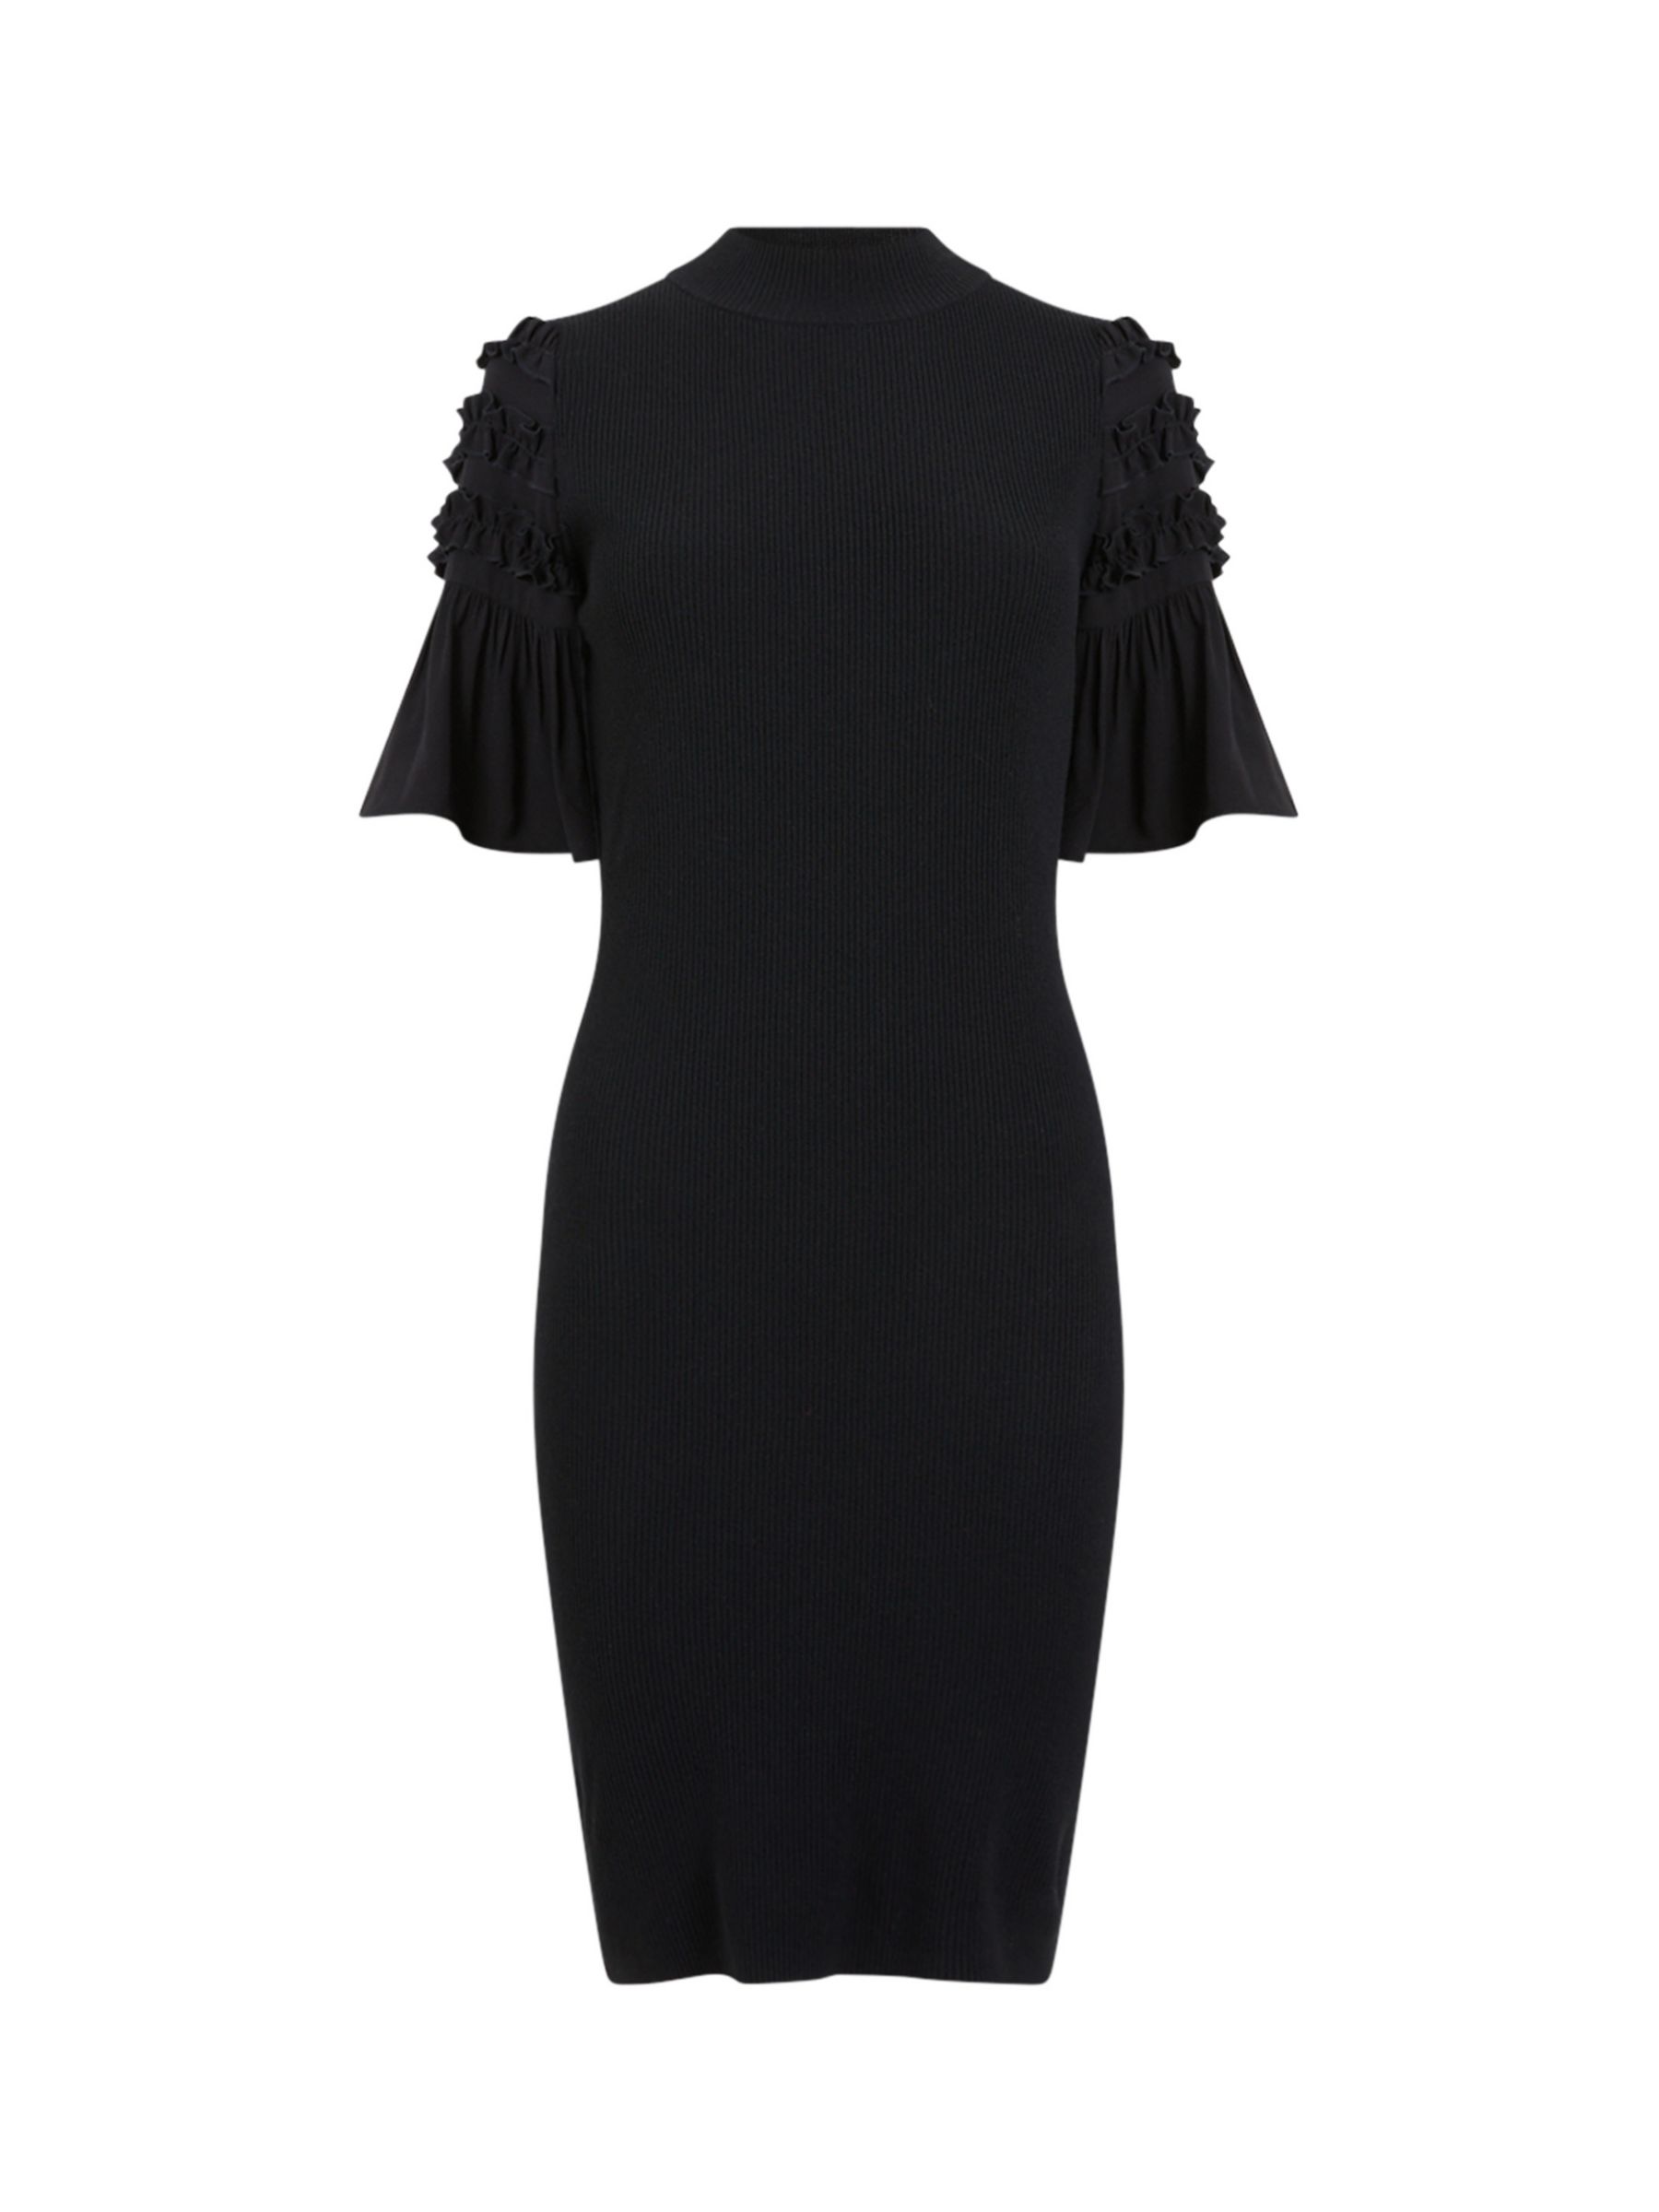 Buy French Connection Krista Mini Dress, Black Online at johnlewis.com